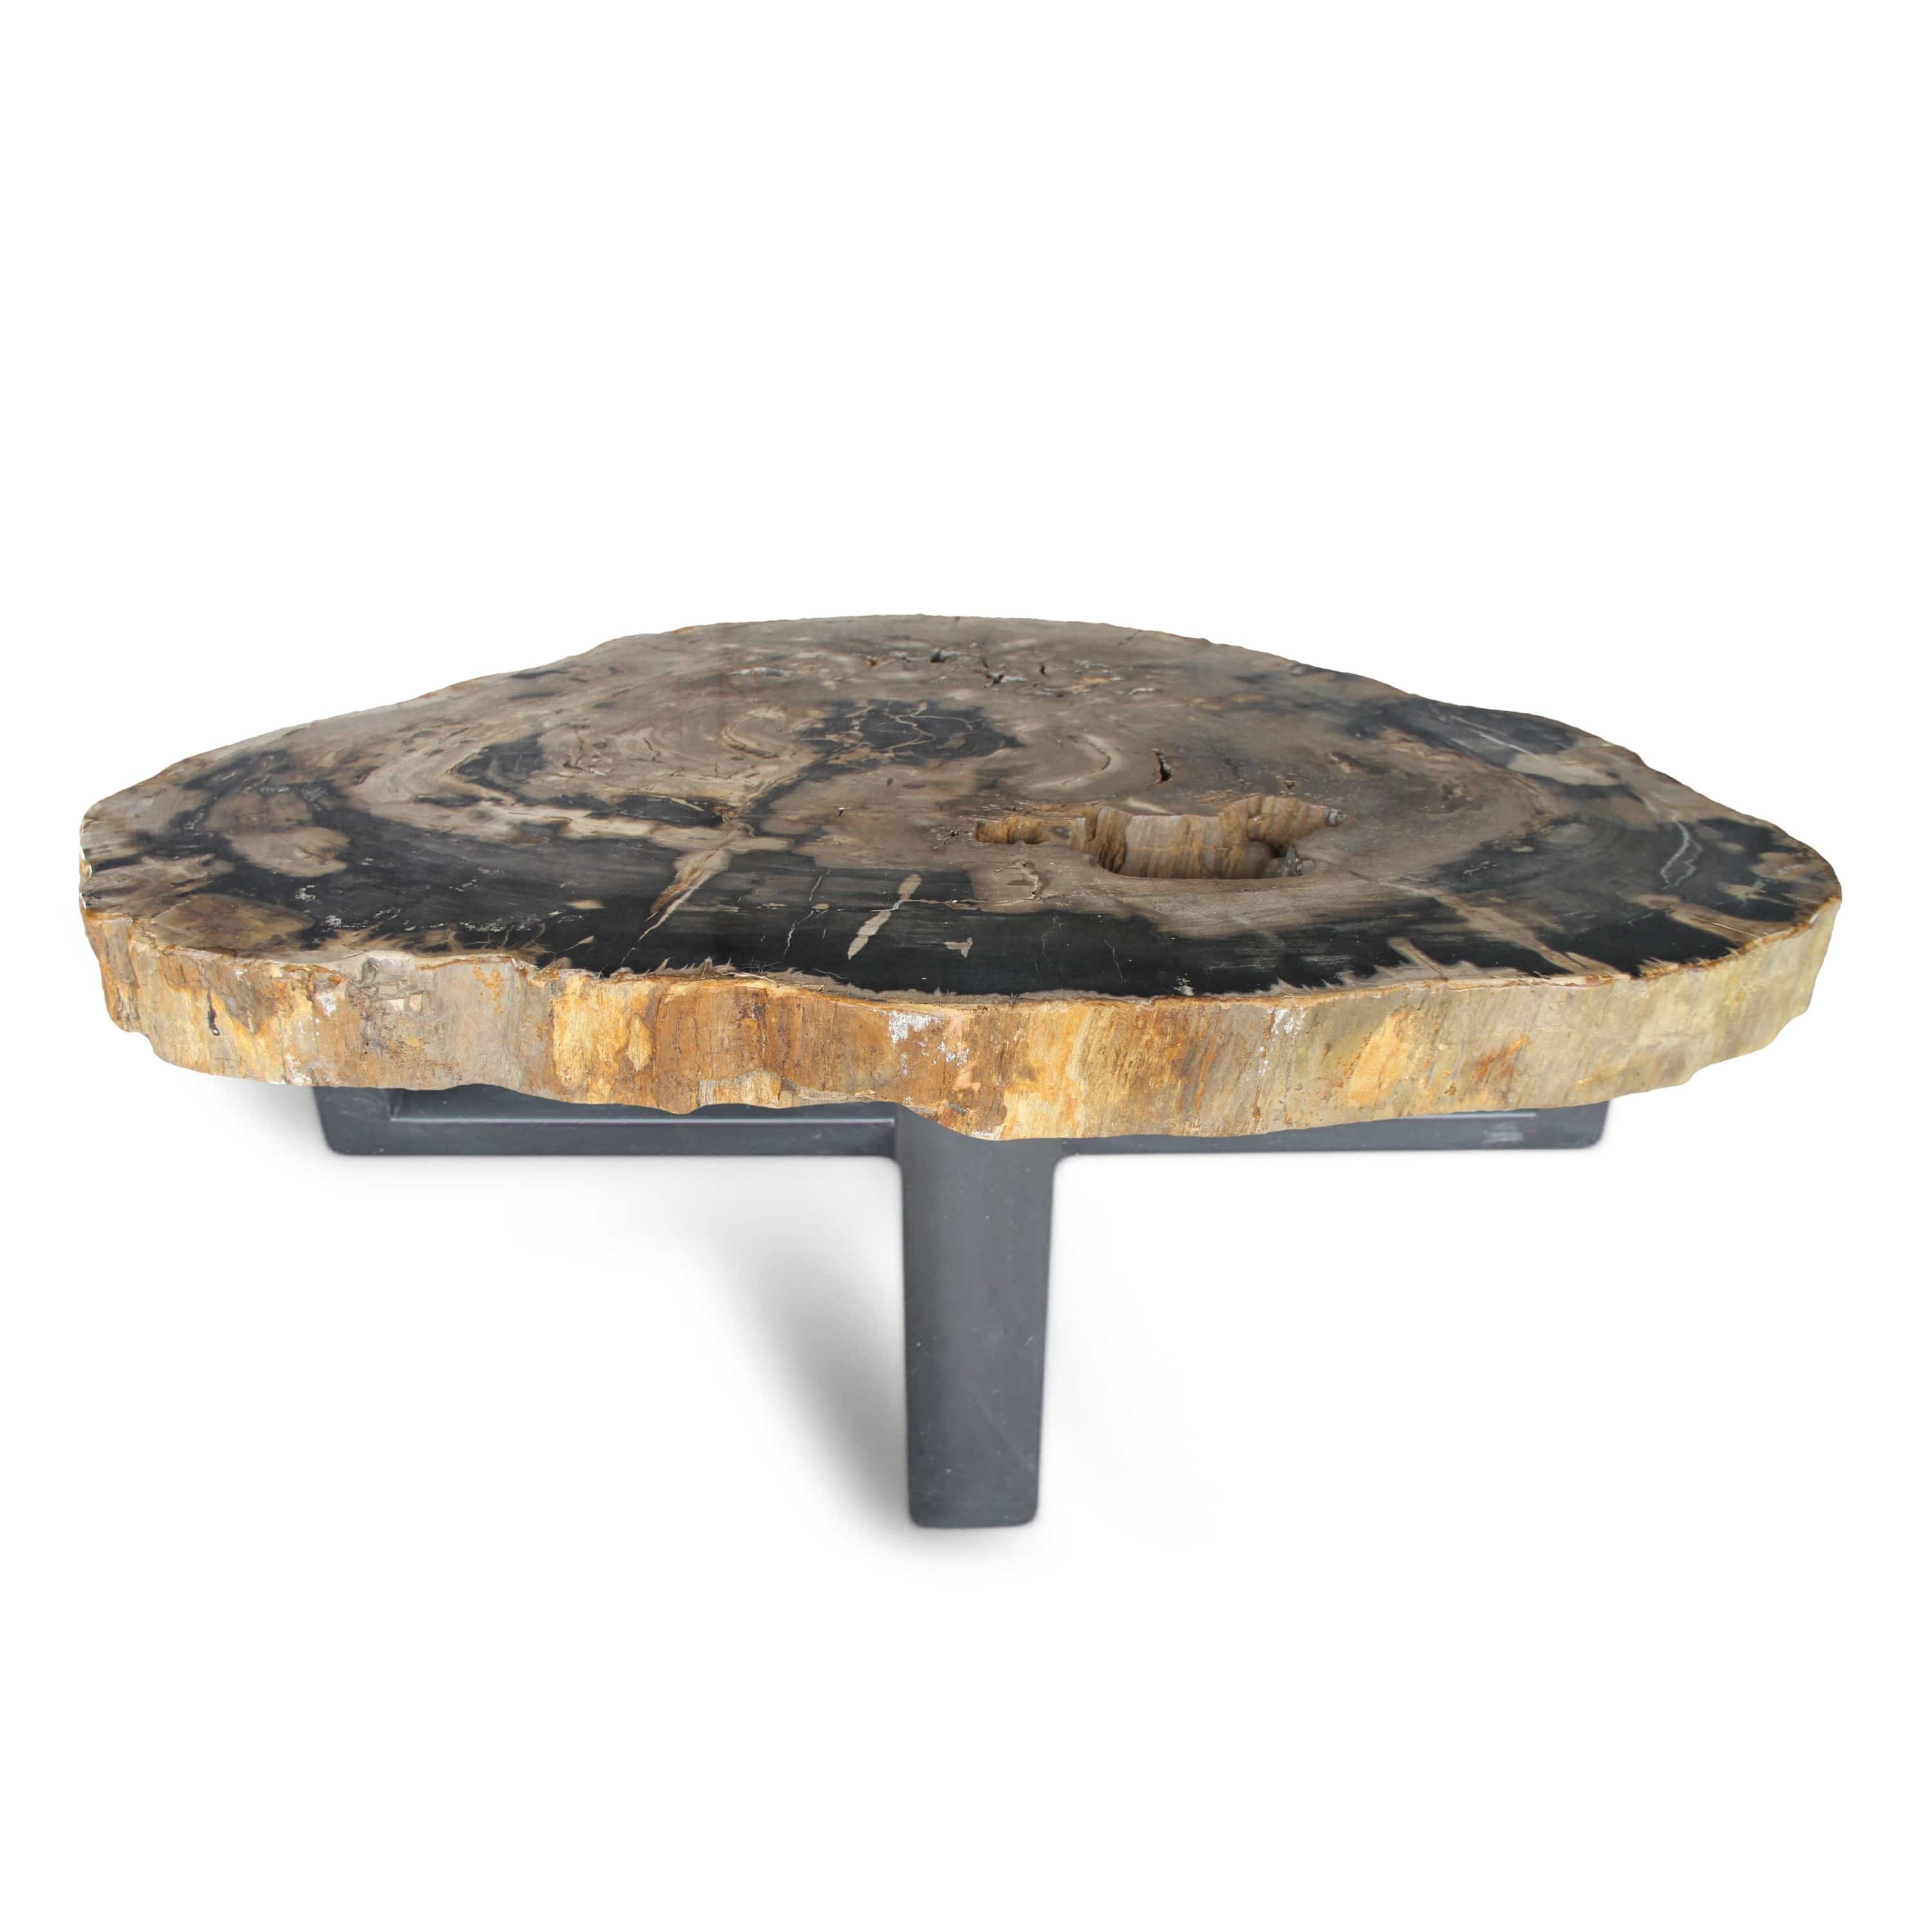 Kalifano Petrified Wood Petrified Wood Round Slab Coffee Table from Indonesia - 48" / 343 lbs PWT12600.001